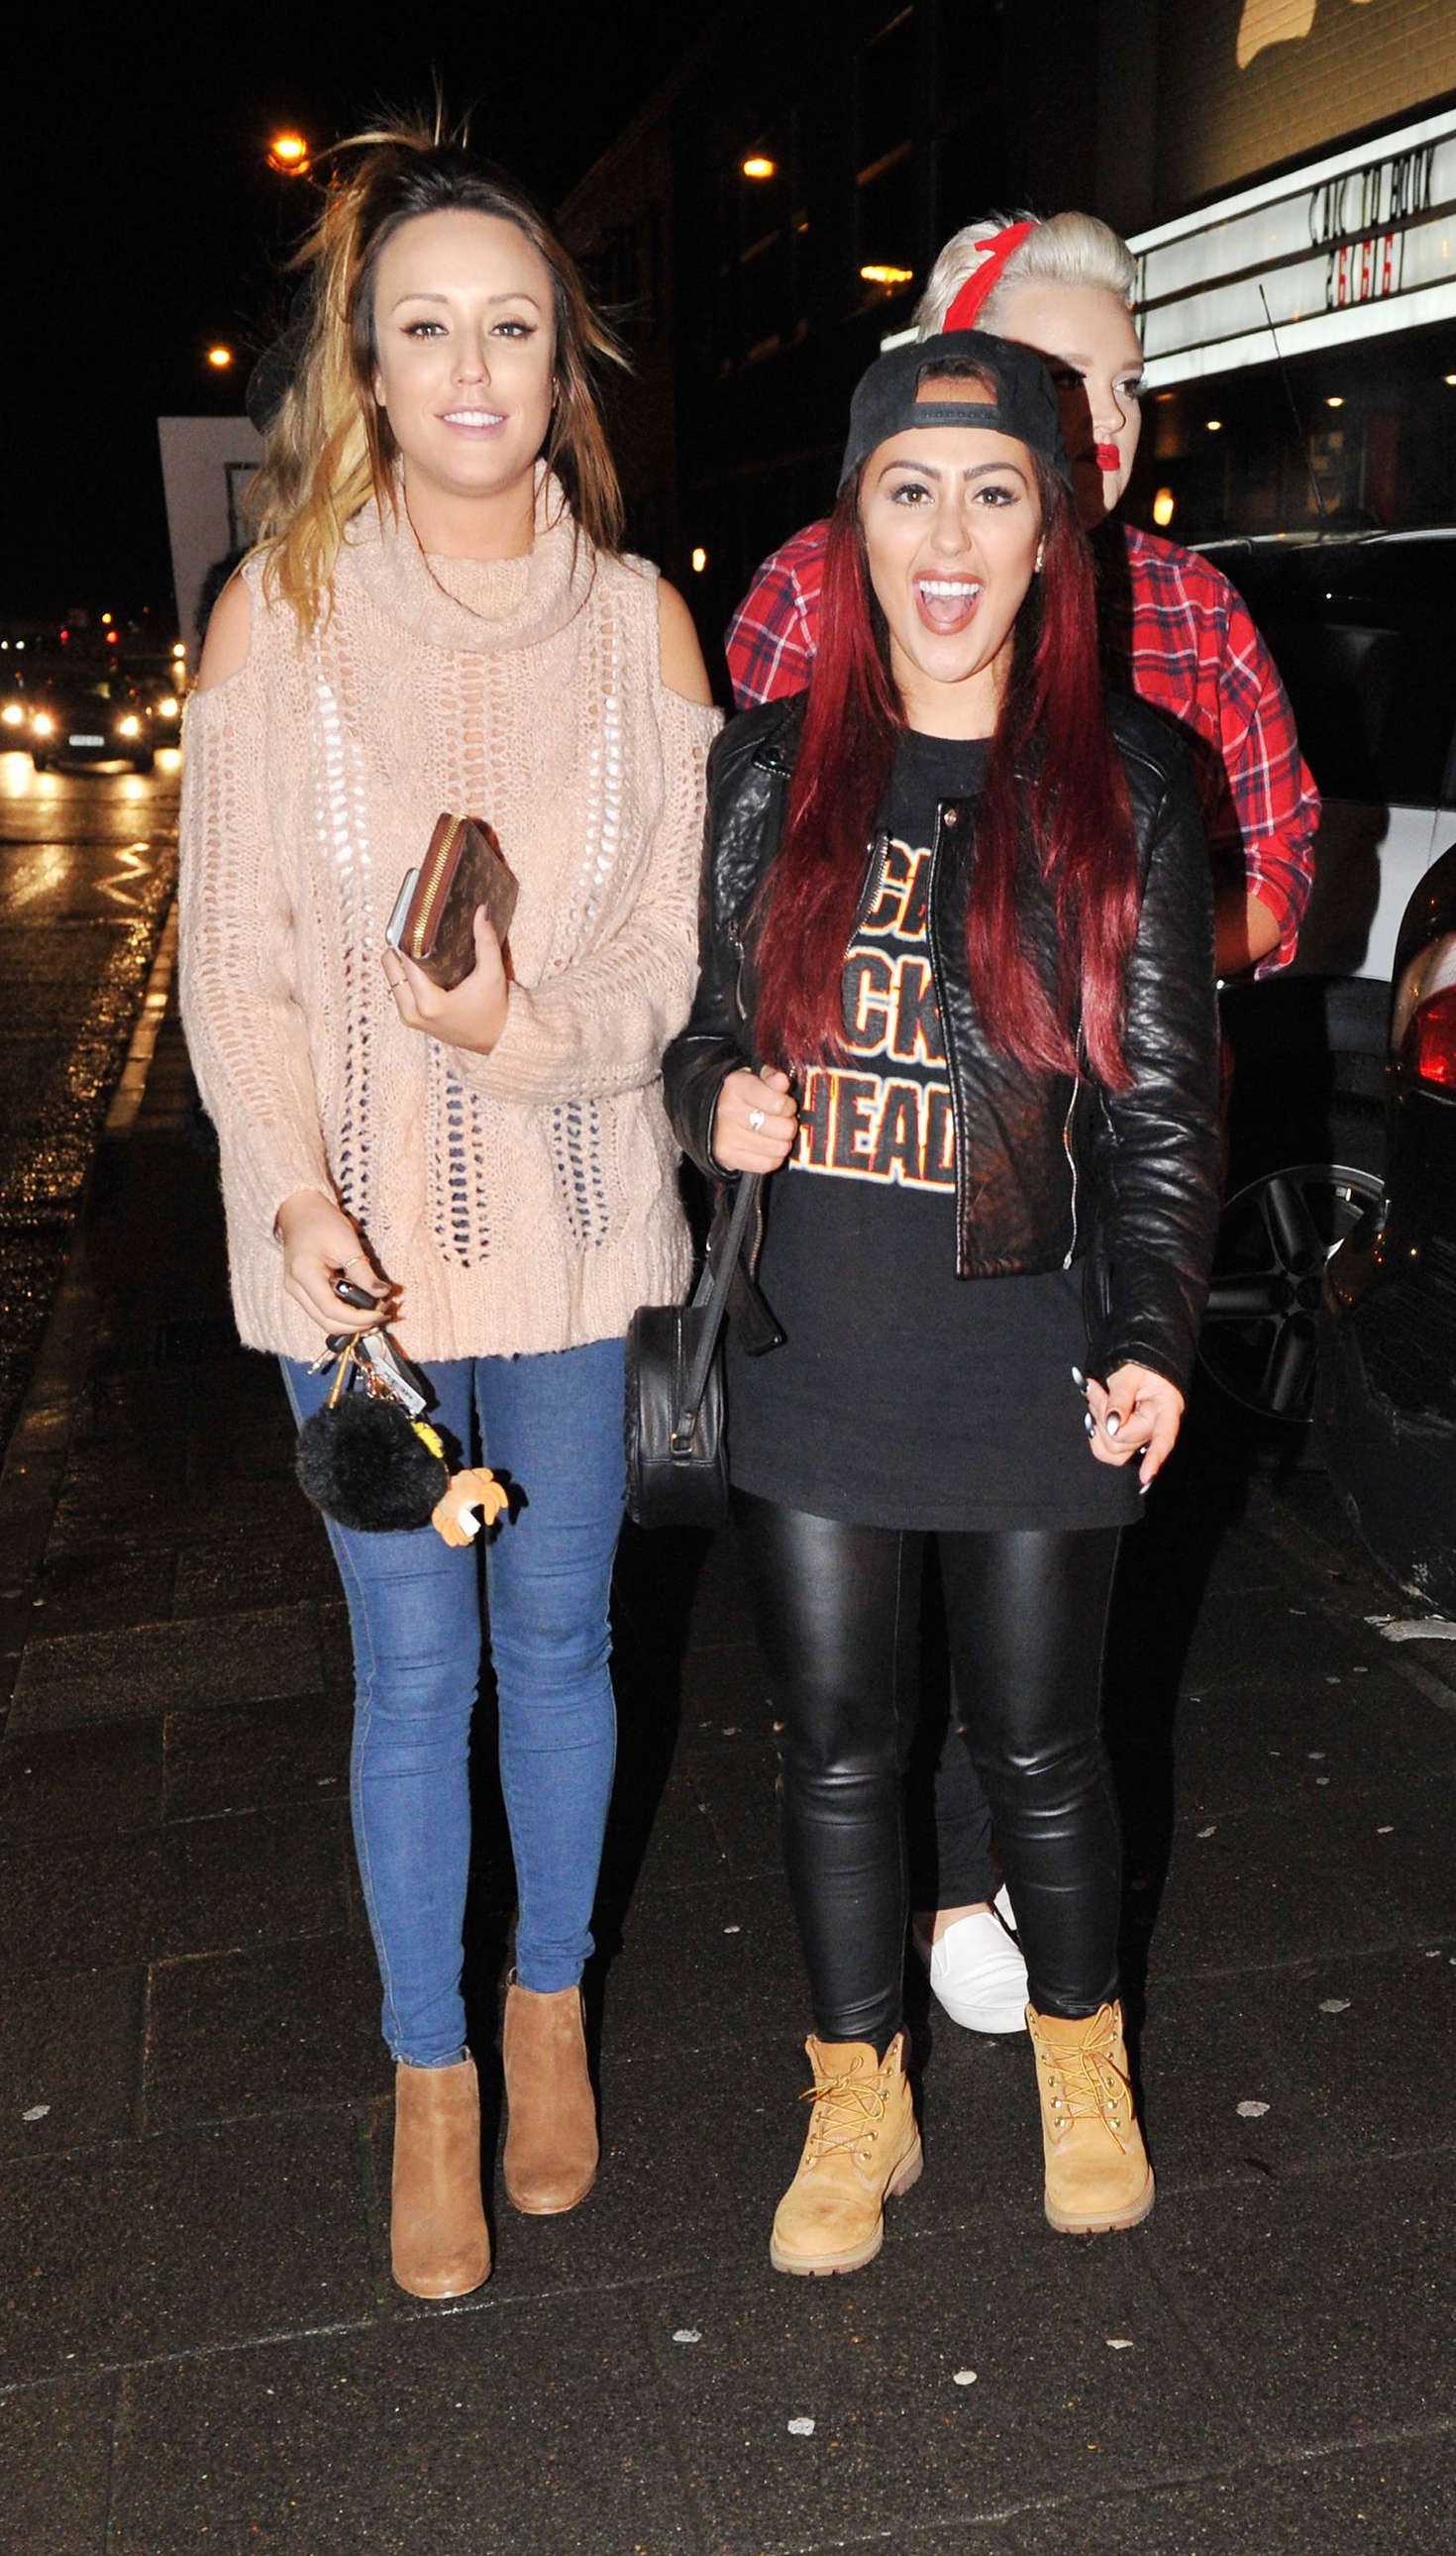 Charlotte Crosby & Sophie Kasaei out in Newcastle